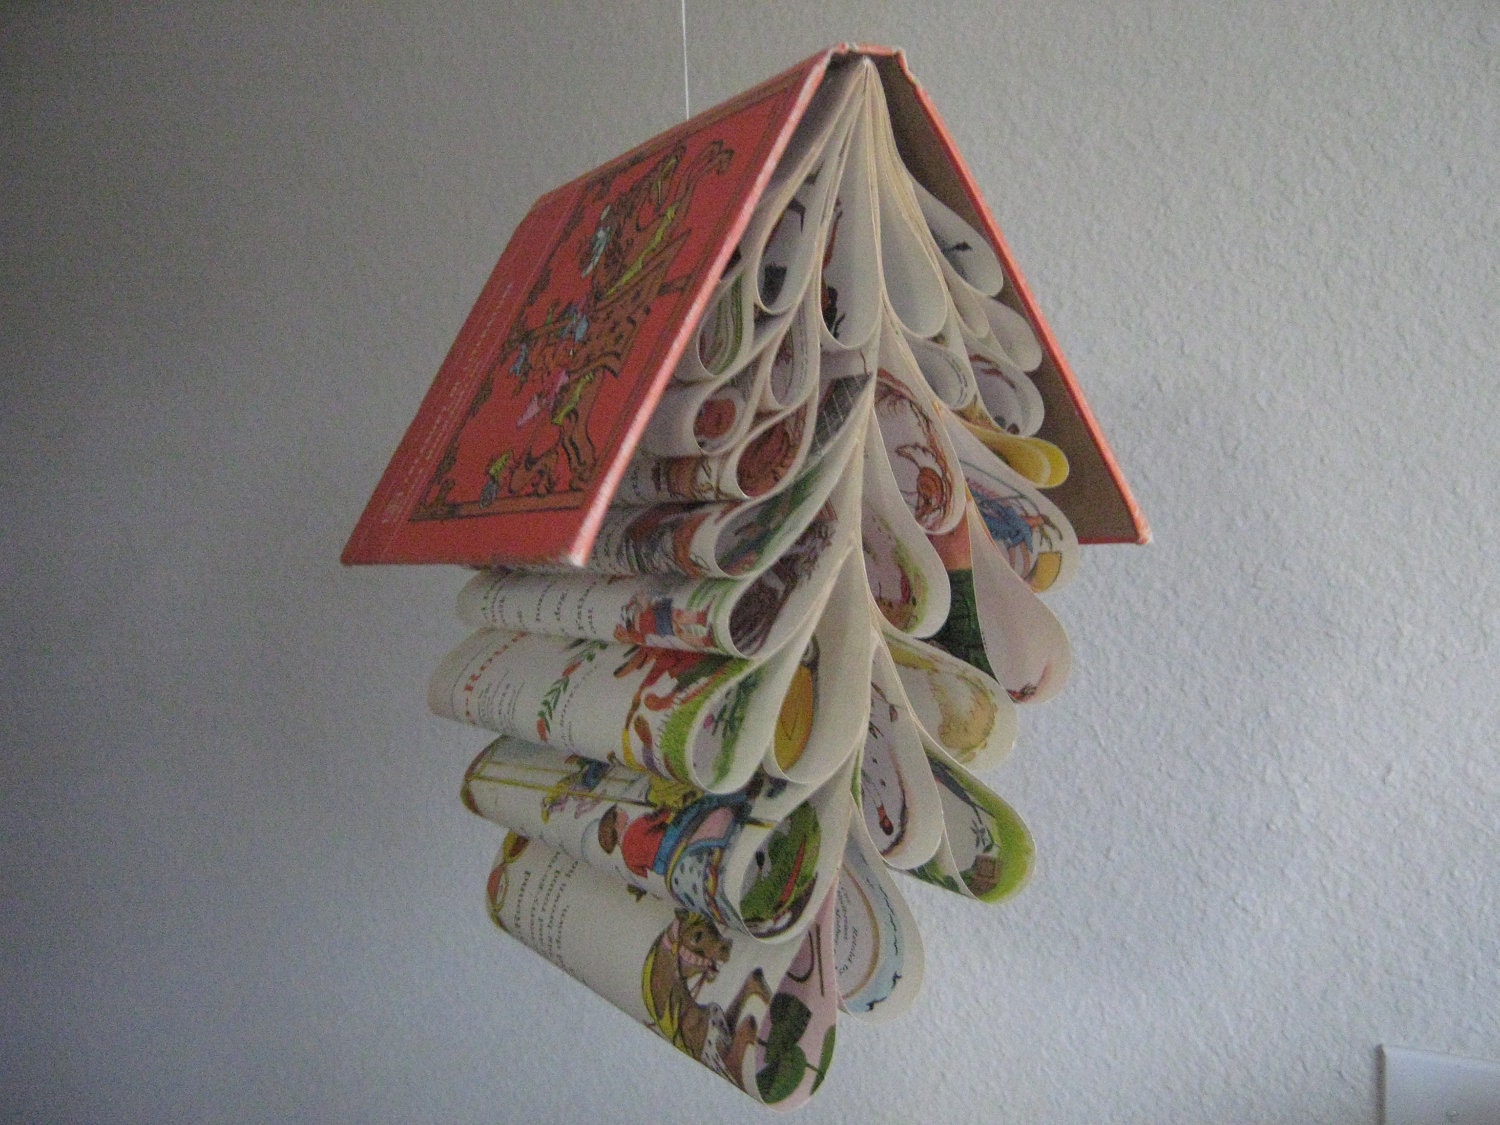 Book Mobile Upcycled from a Vintage Children's Book: Treasury of Literature